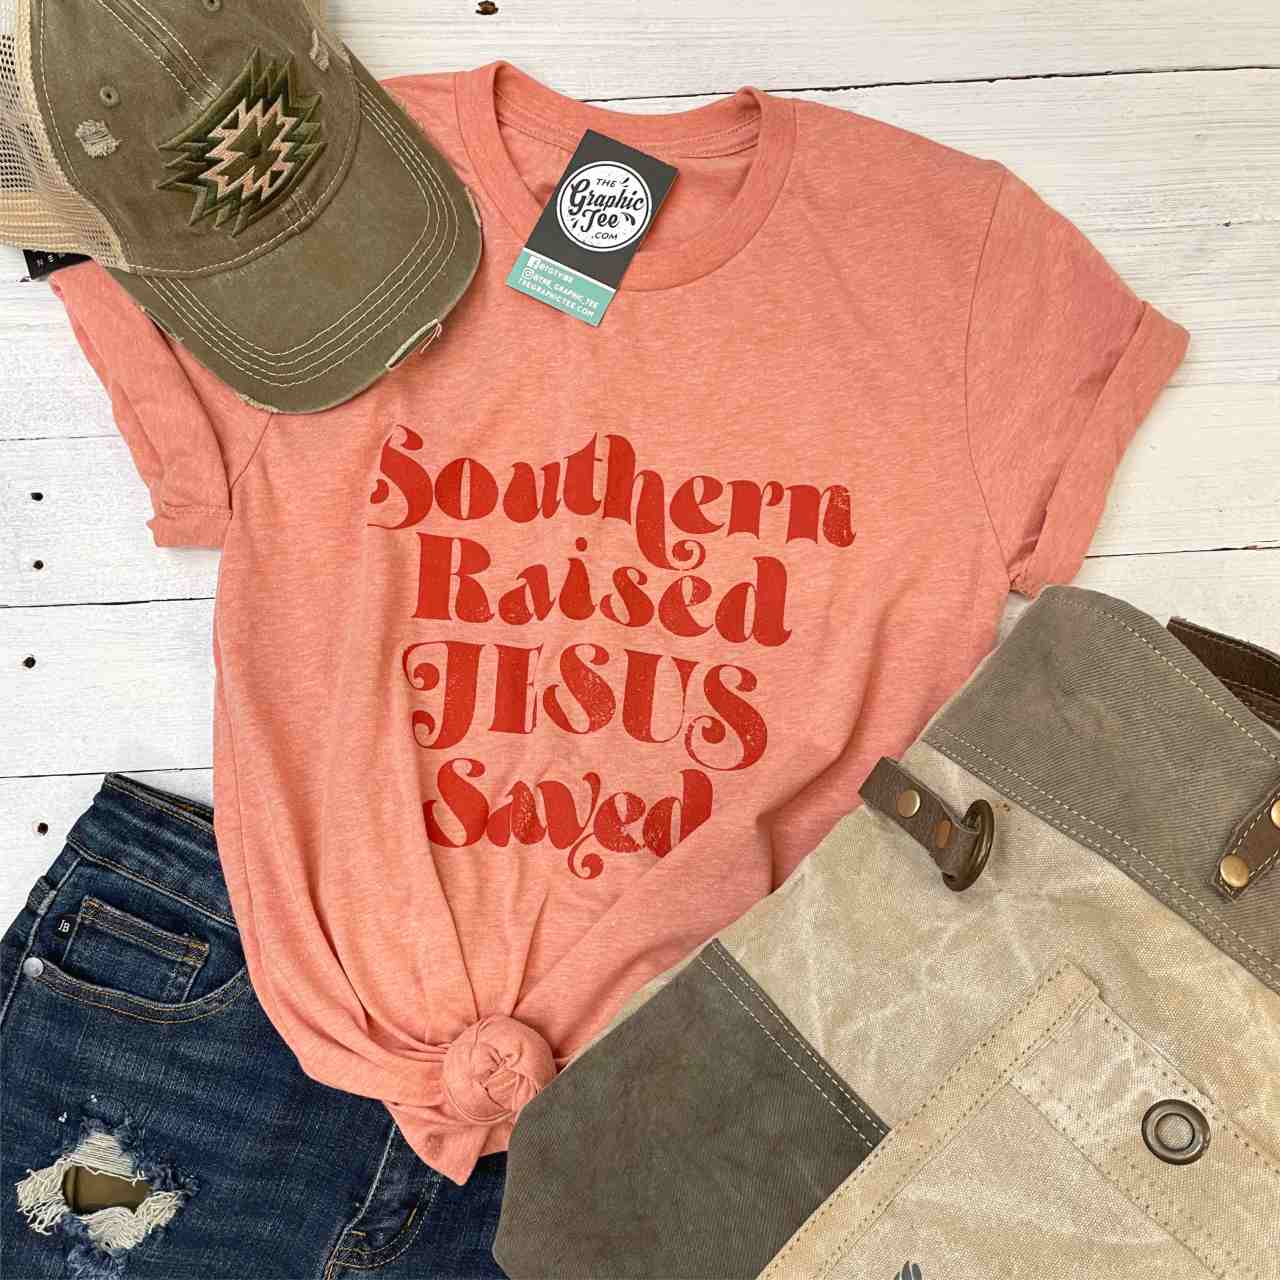 Southern Raised and Jesus Saved Unisex Tee - The Graphic Tee